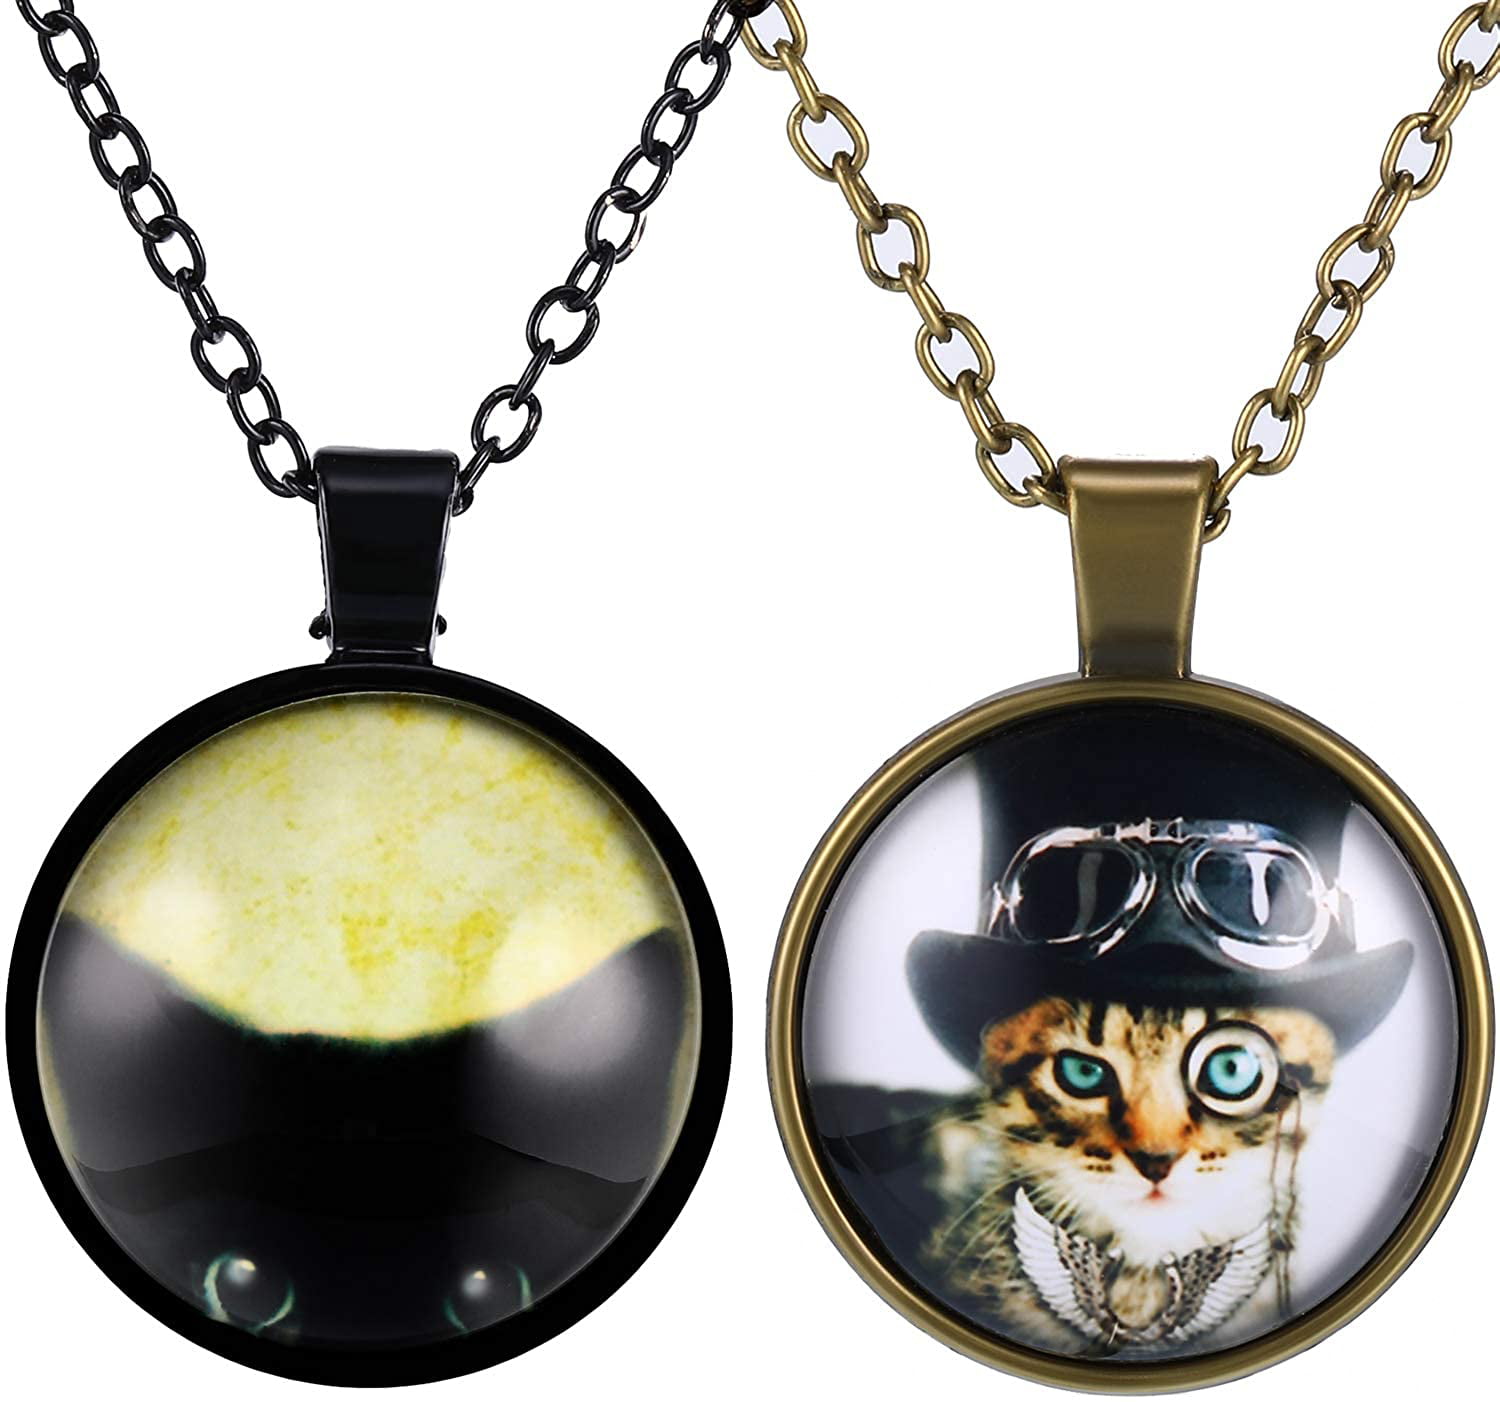 cat gifts Kawaii cat Steampunk cat Cat jewelry Black cat necklace Cat charm Black cat pendant Cat lover gift cat themed gifts